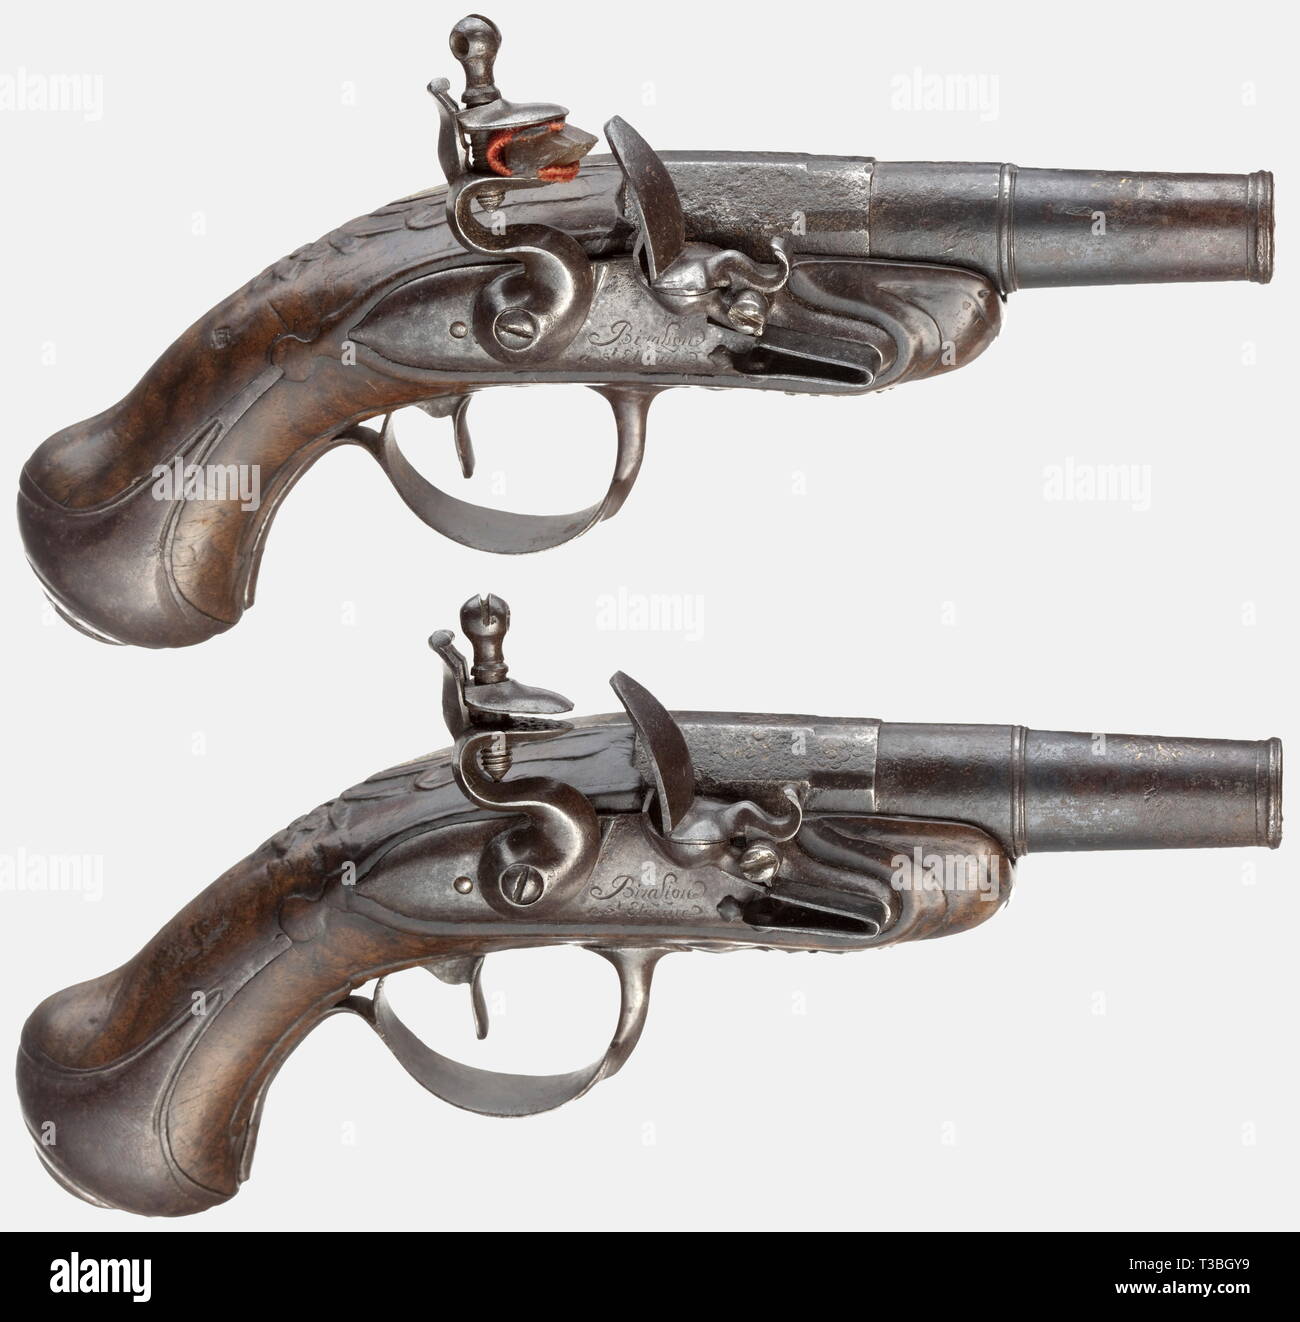 A pair of flintlock traveler's pistols, Bizalion in St. Etienne, circa 1780. Round screw barrels with lugs, twelve-groove rifled bores in 10 mm calibre, engraved decoration on top of the barrels, and little remnants of bluing and gilding. Flintlocks with the engraved signature, 'Bizalion à St. Etienne'. Lightly carved walnut stocks with smooth, iron furniture. Length of each 17 cm. historic, historical, 18th century, civil handgun, civil handguns, handheld, gun, guns, firearm, fire arm, firearms, fire arms, weapons, arms, weapon, arm, object, obj, Additional-Rights-Clearance-Info-Not-Available Stock Photo